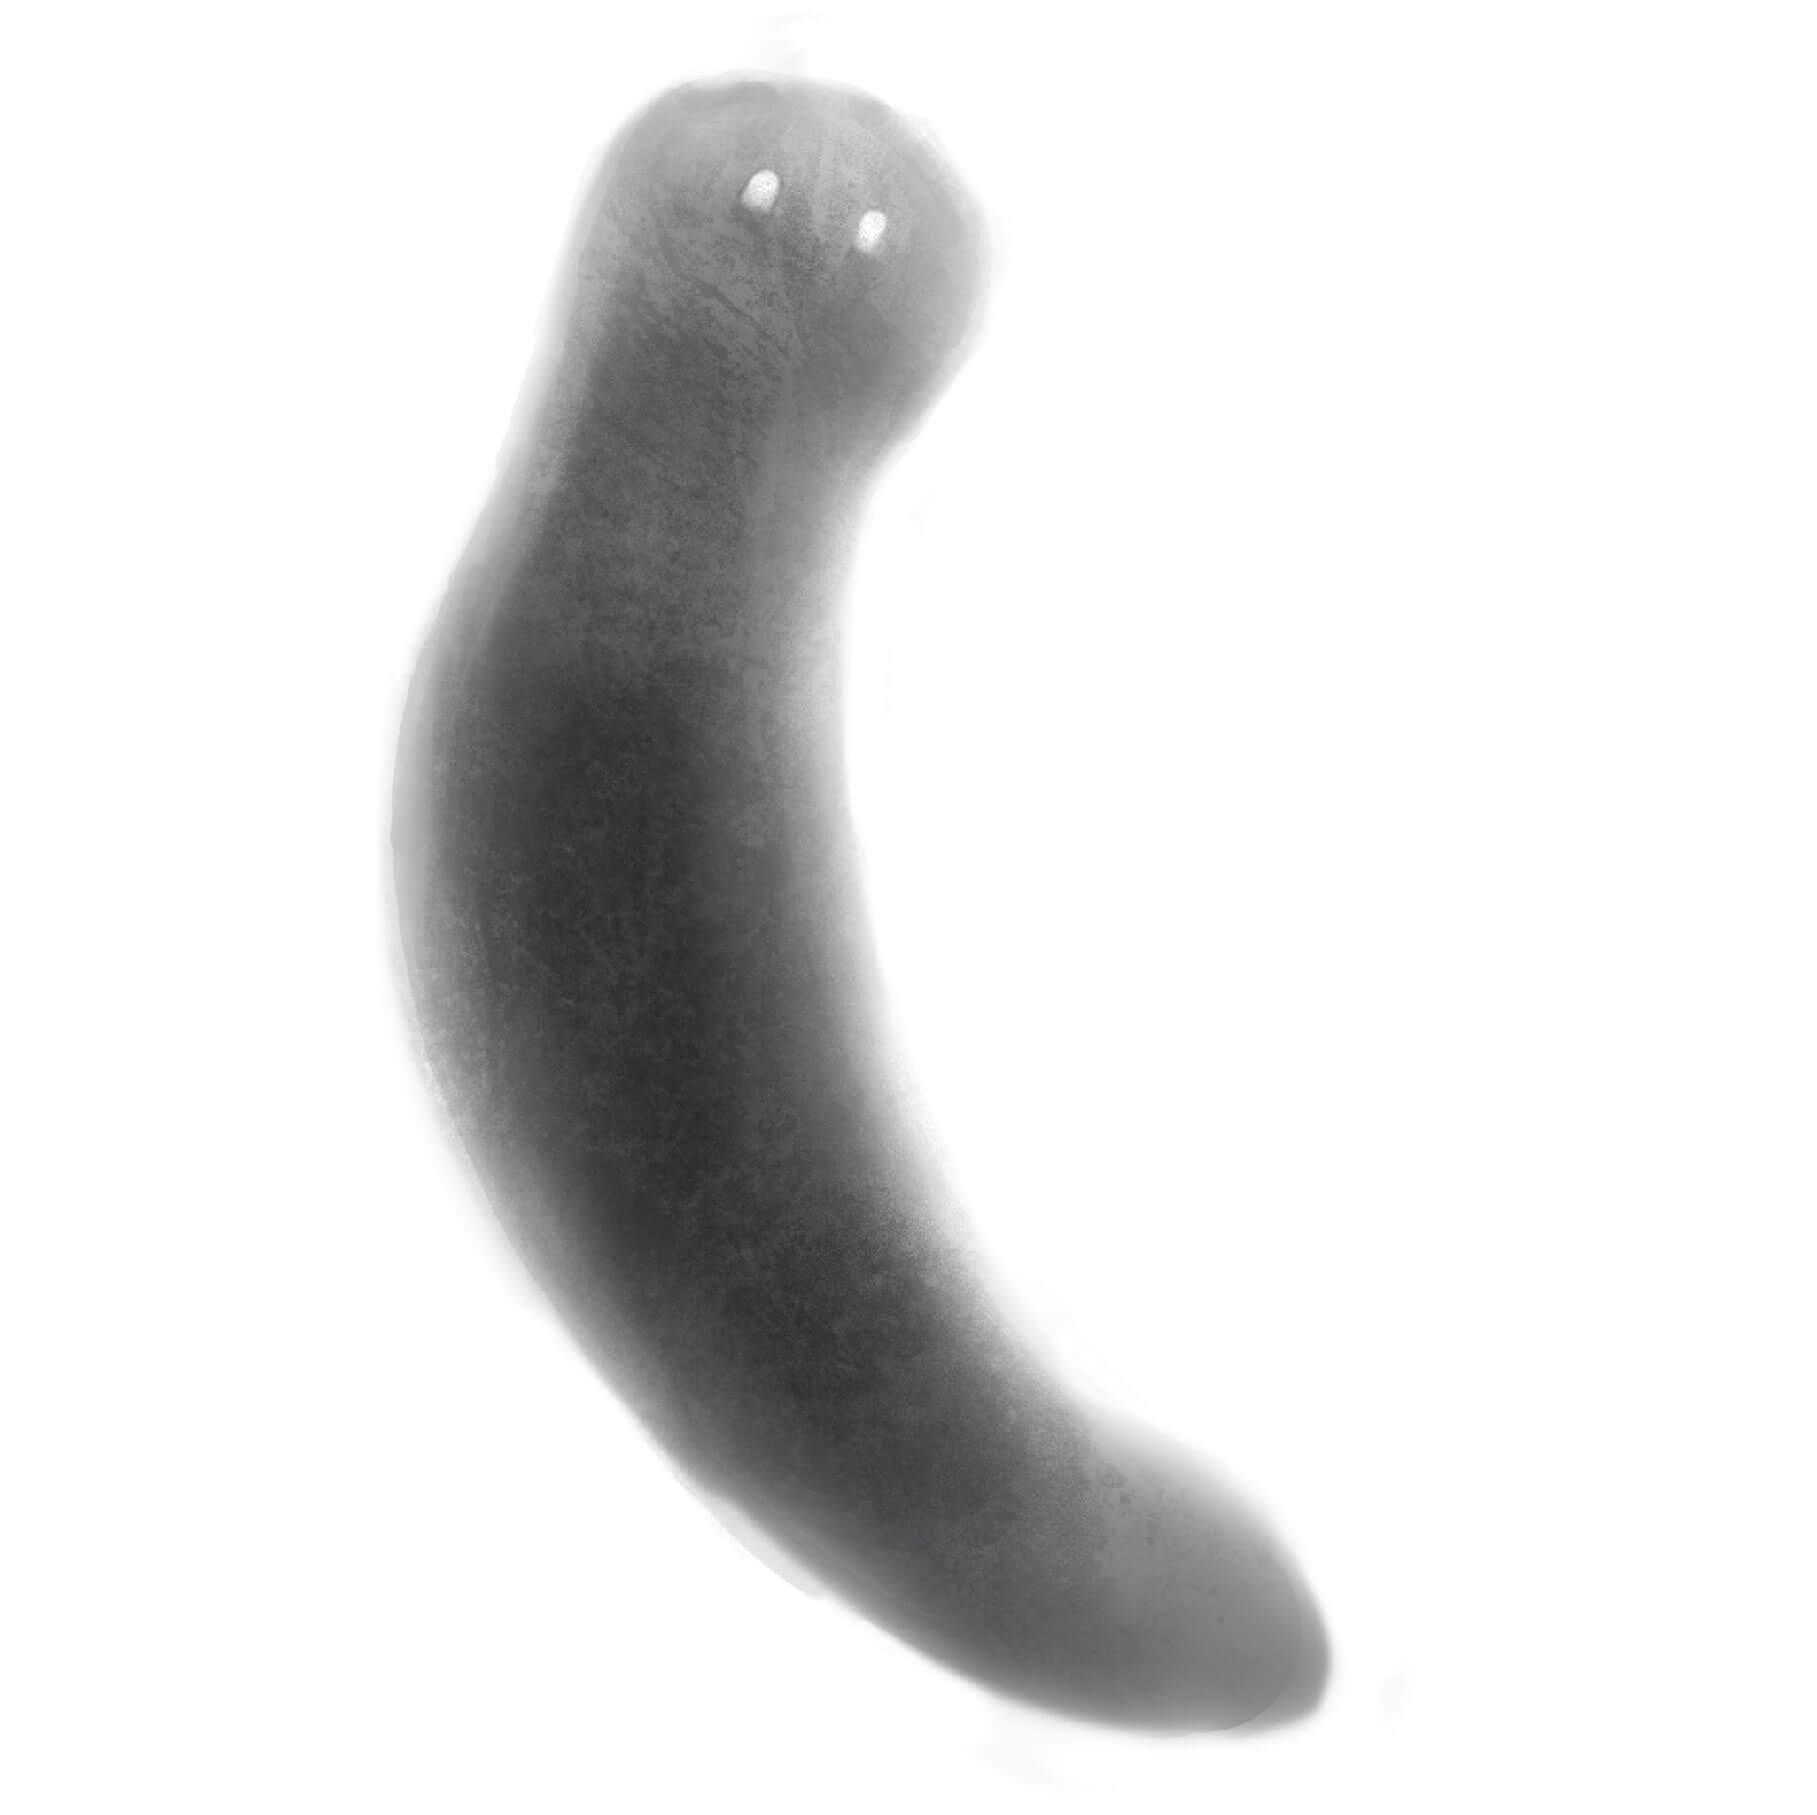 2D Drawing of Planaria